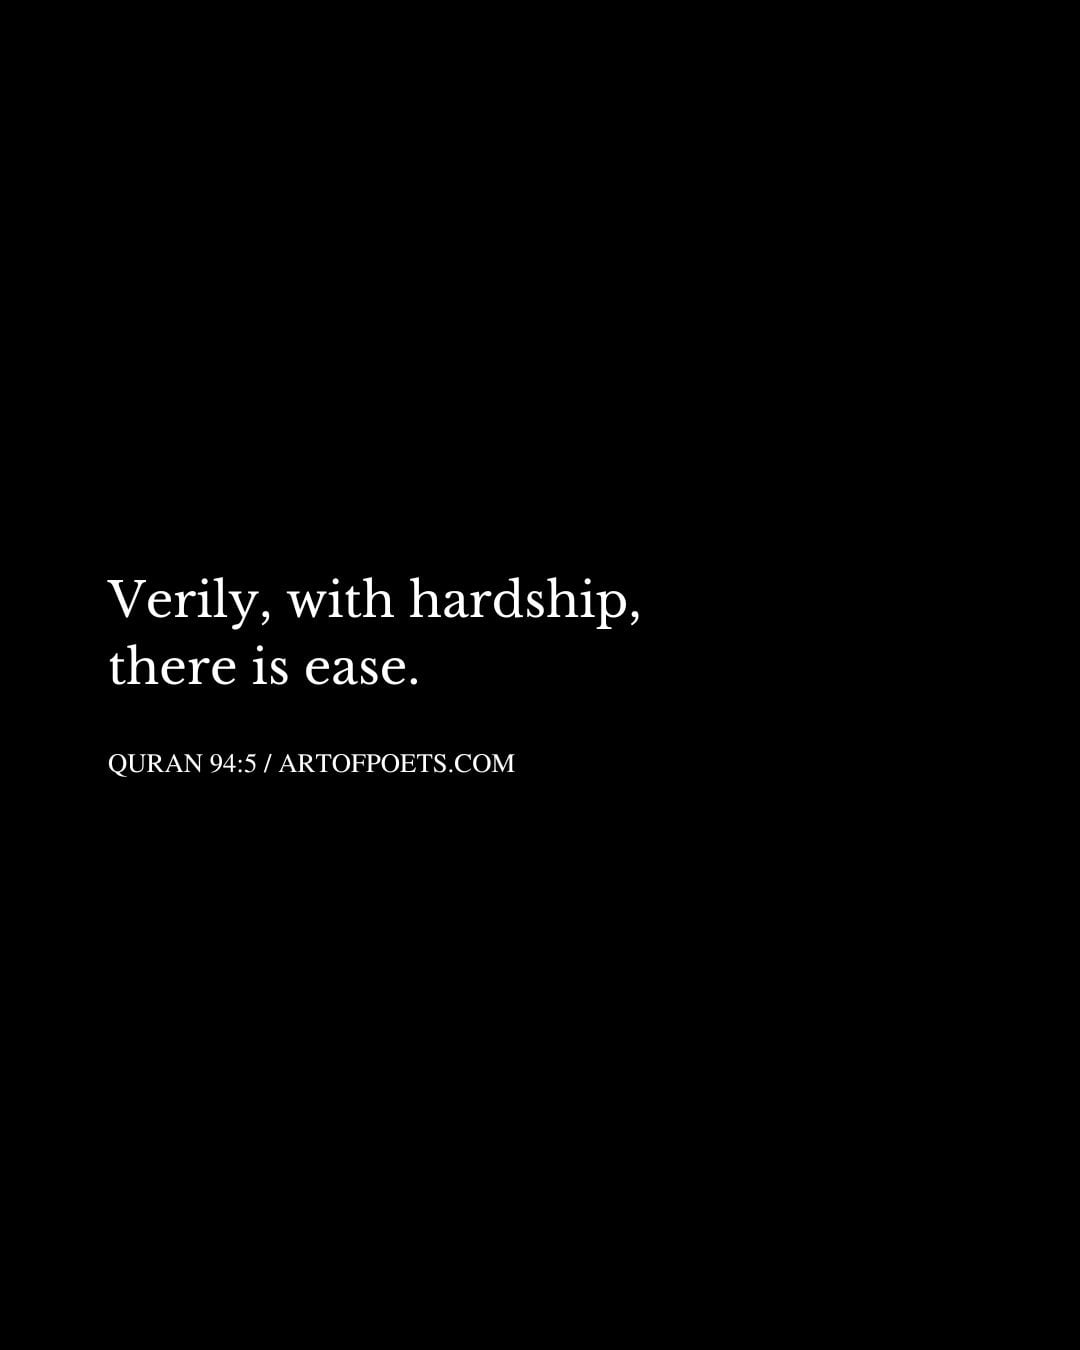 Verily with hardship there is ease